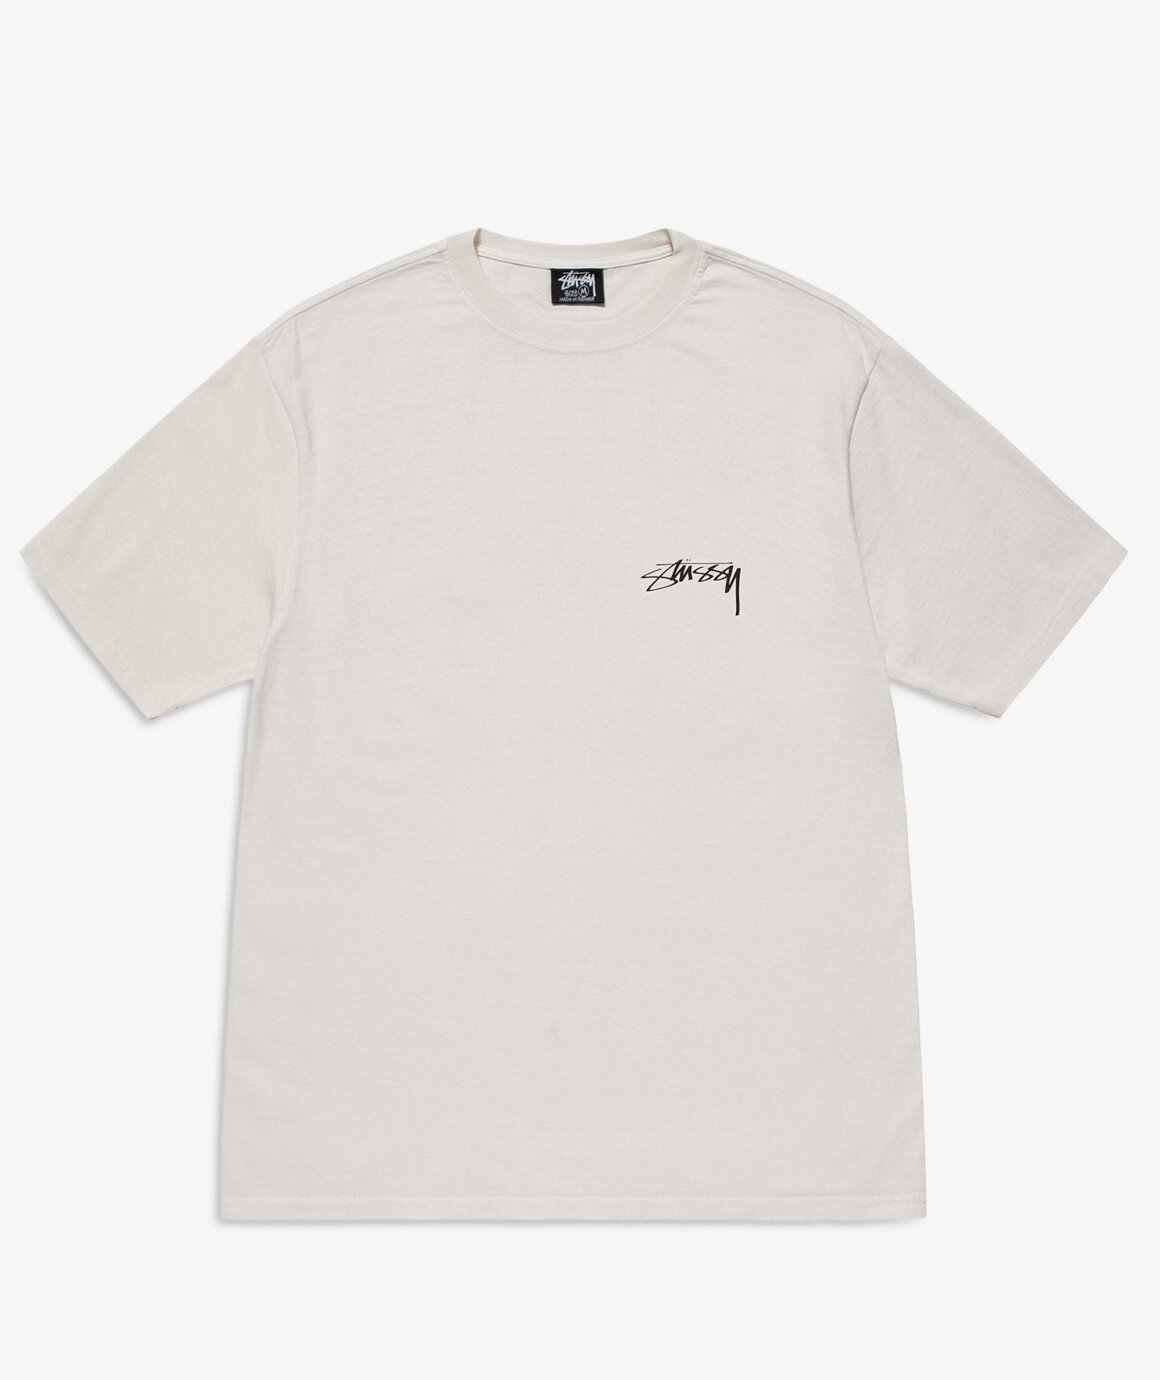 Norse Store | Shipping Worldwide - Stussy 100% Pigment Dyed Tee - Natural